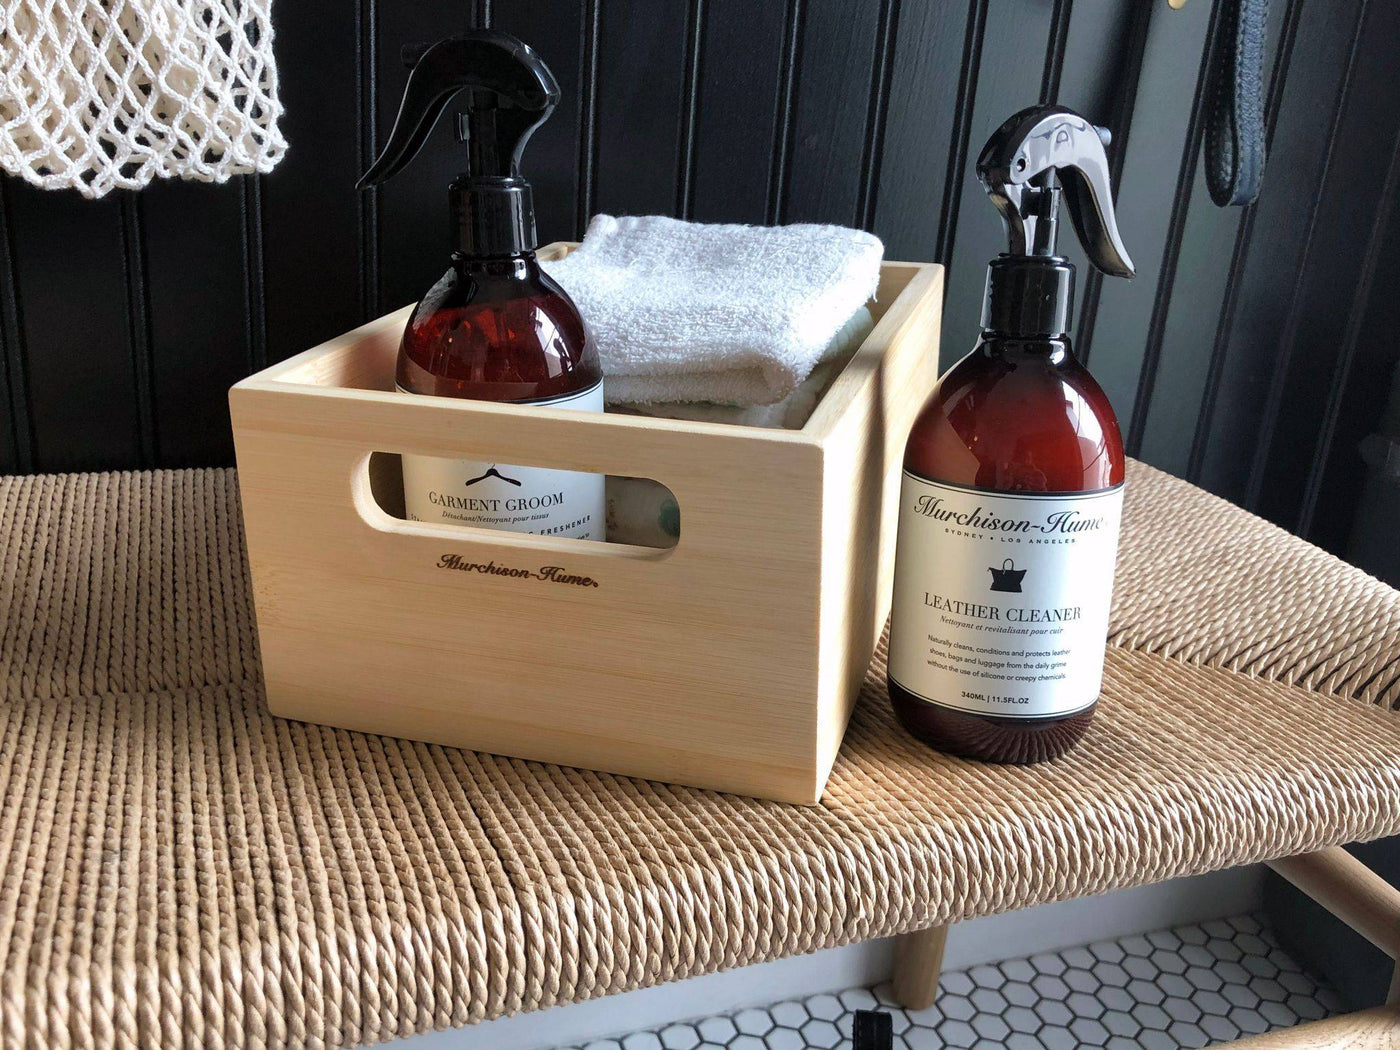 Leather Cleaner and Garment Groom: From The Runway To Your Living Room